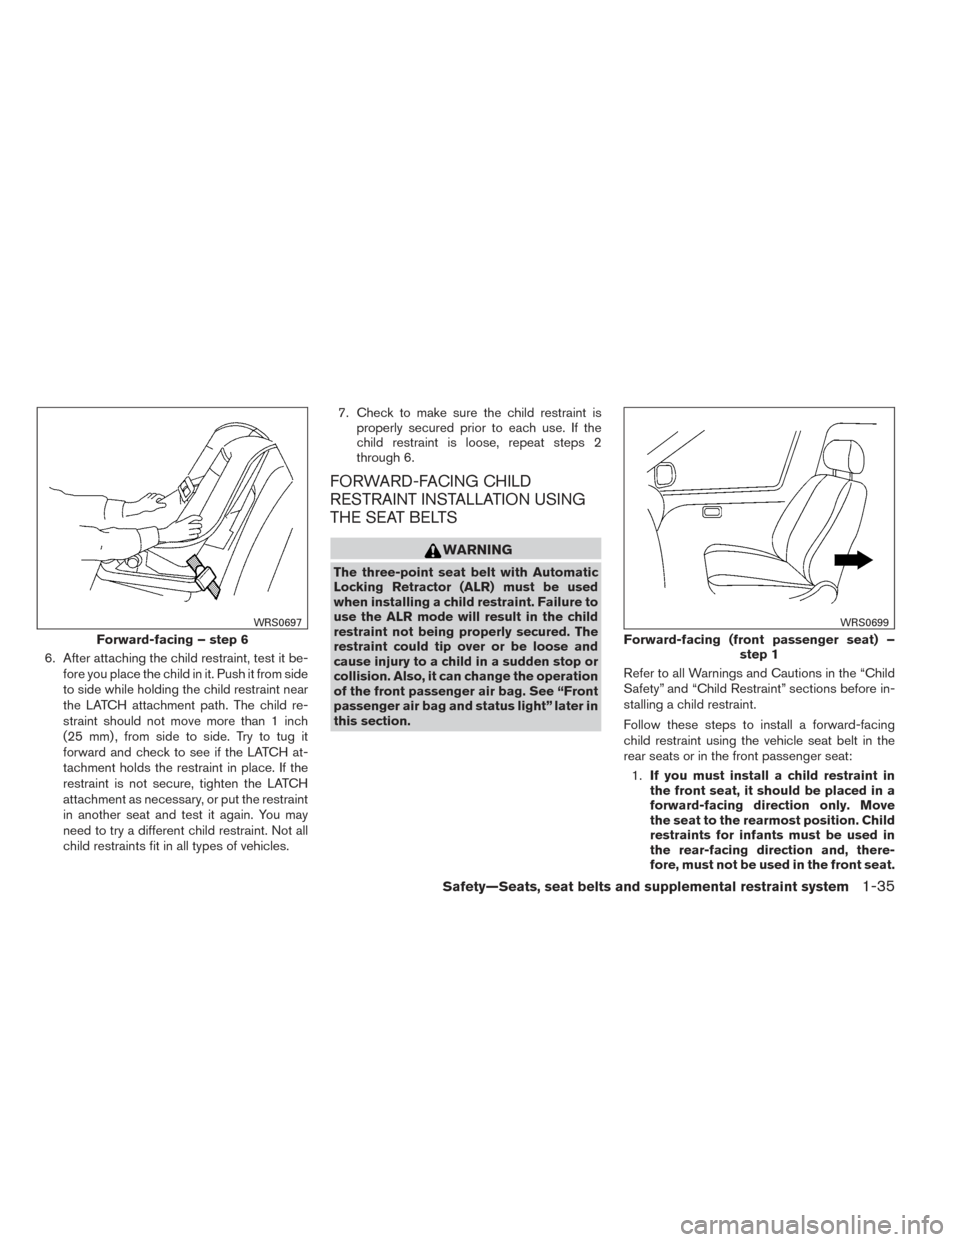 NISSAN ALTIMA 2014 L33 / 5.G Owners Manual 6. After attaching the child restraint, test it be-fore you place the child in it. Push it from side
to side while holding the child restraint near
the LATCH attachment path. The child re-
straint sho